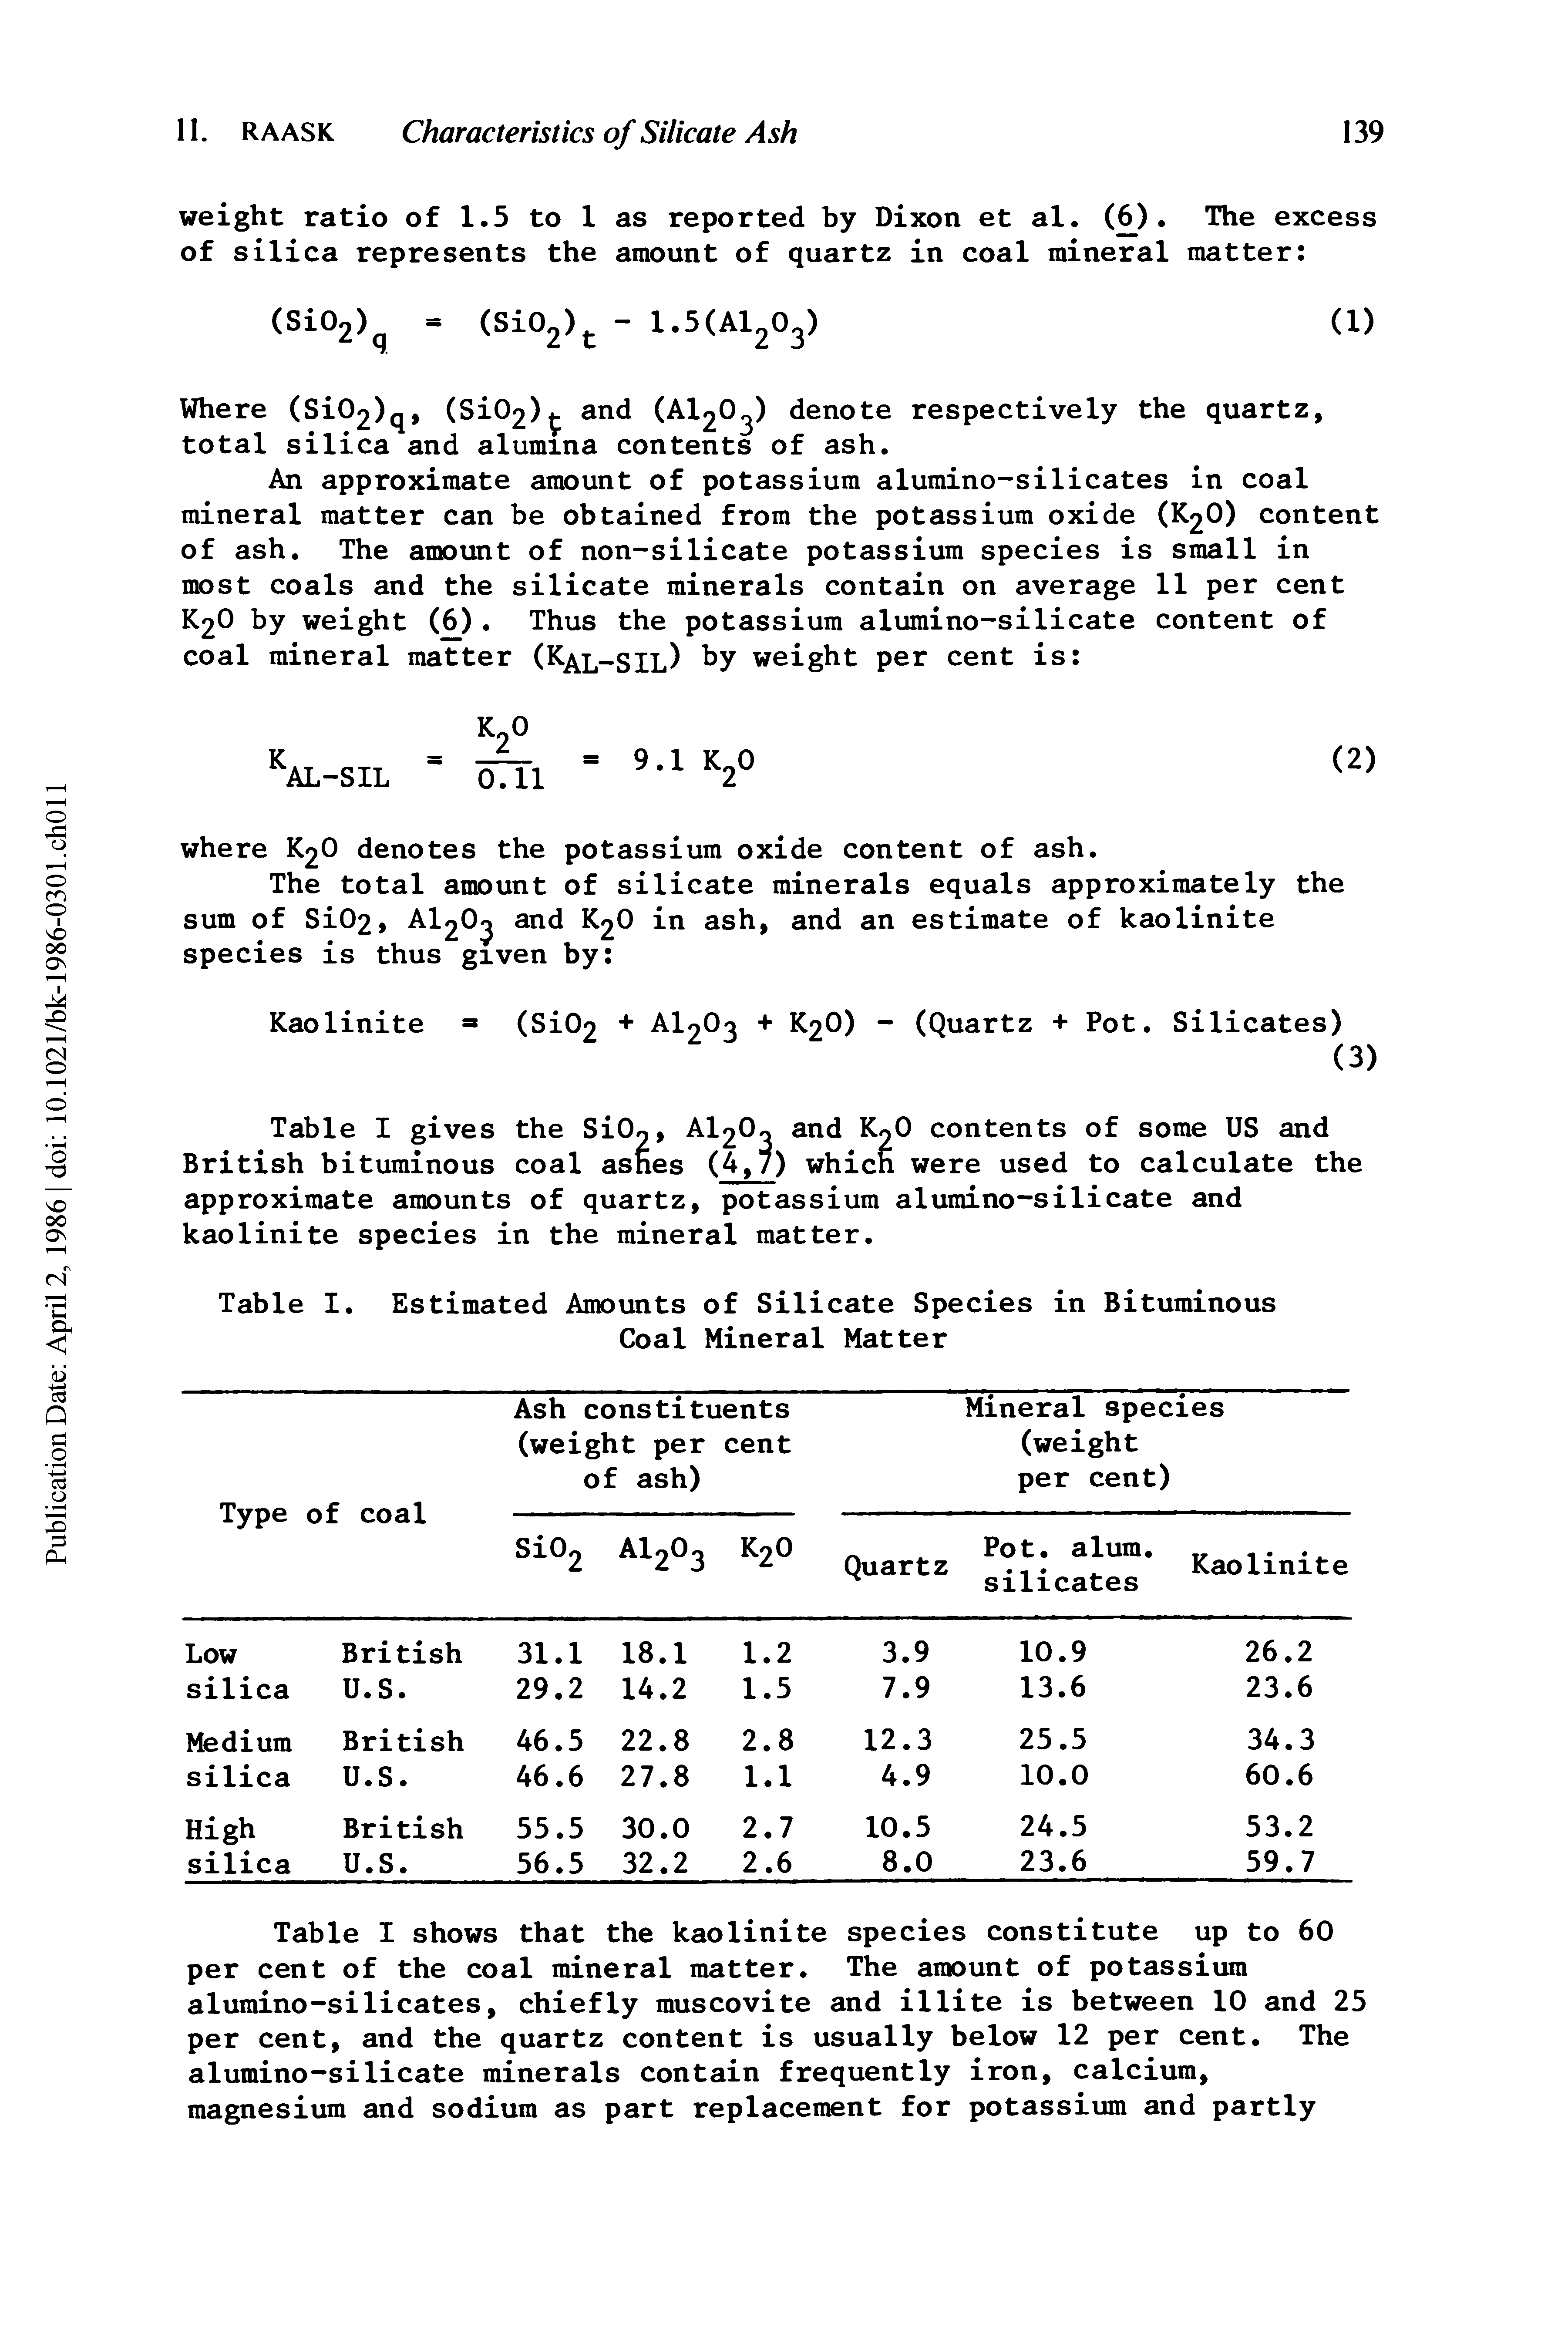 Table I gives the SiO2> Al20q and K2O contents of some US and British bituminous coal ashes (4,7) which were used to calculate the approximate amounts of quartz, potassium alumino-silicate and kaolinite species in the mineral matter.